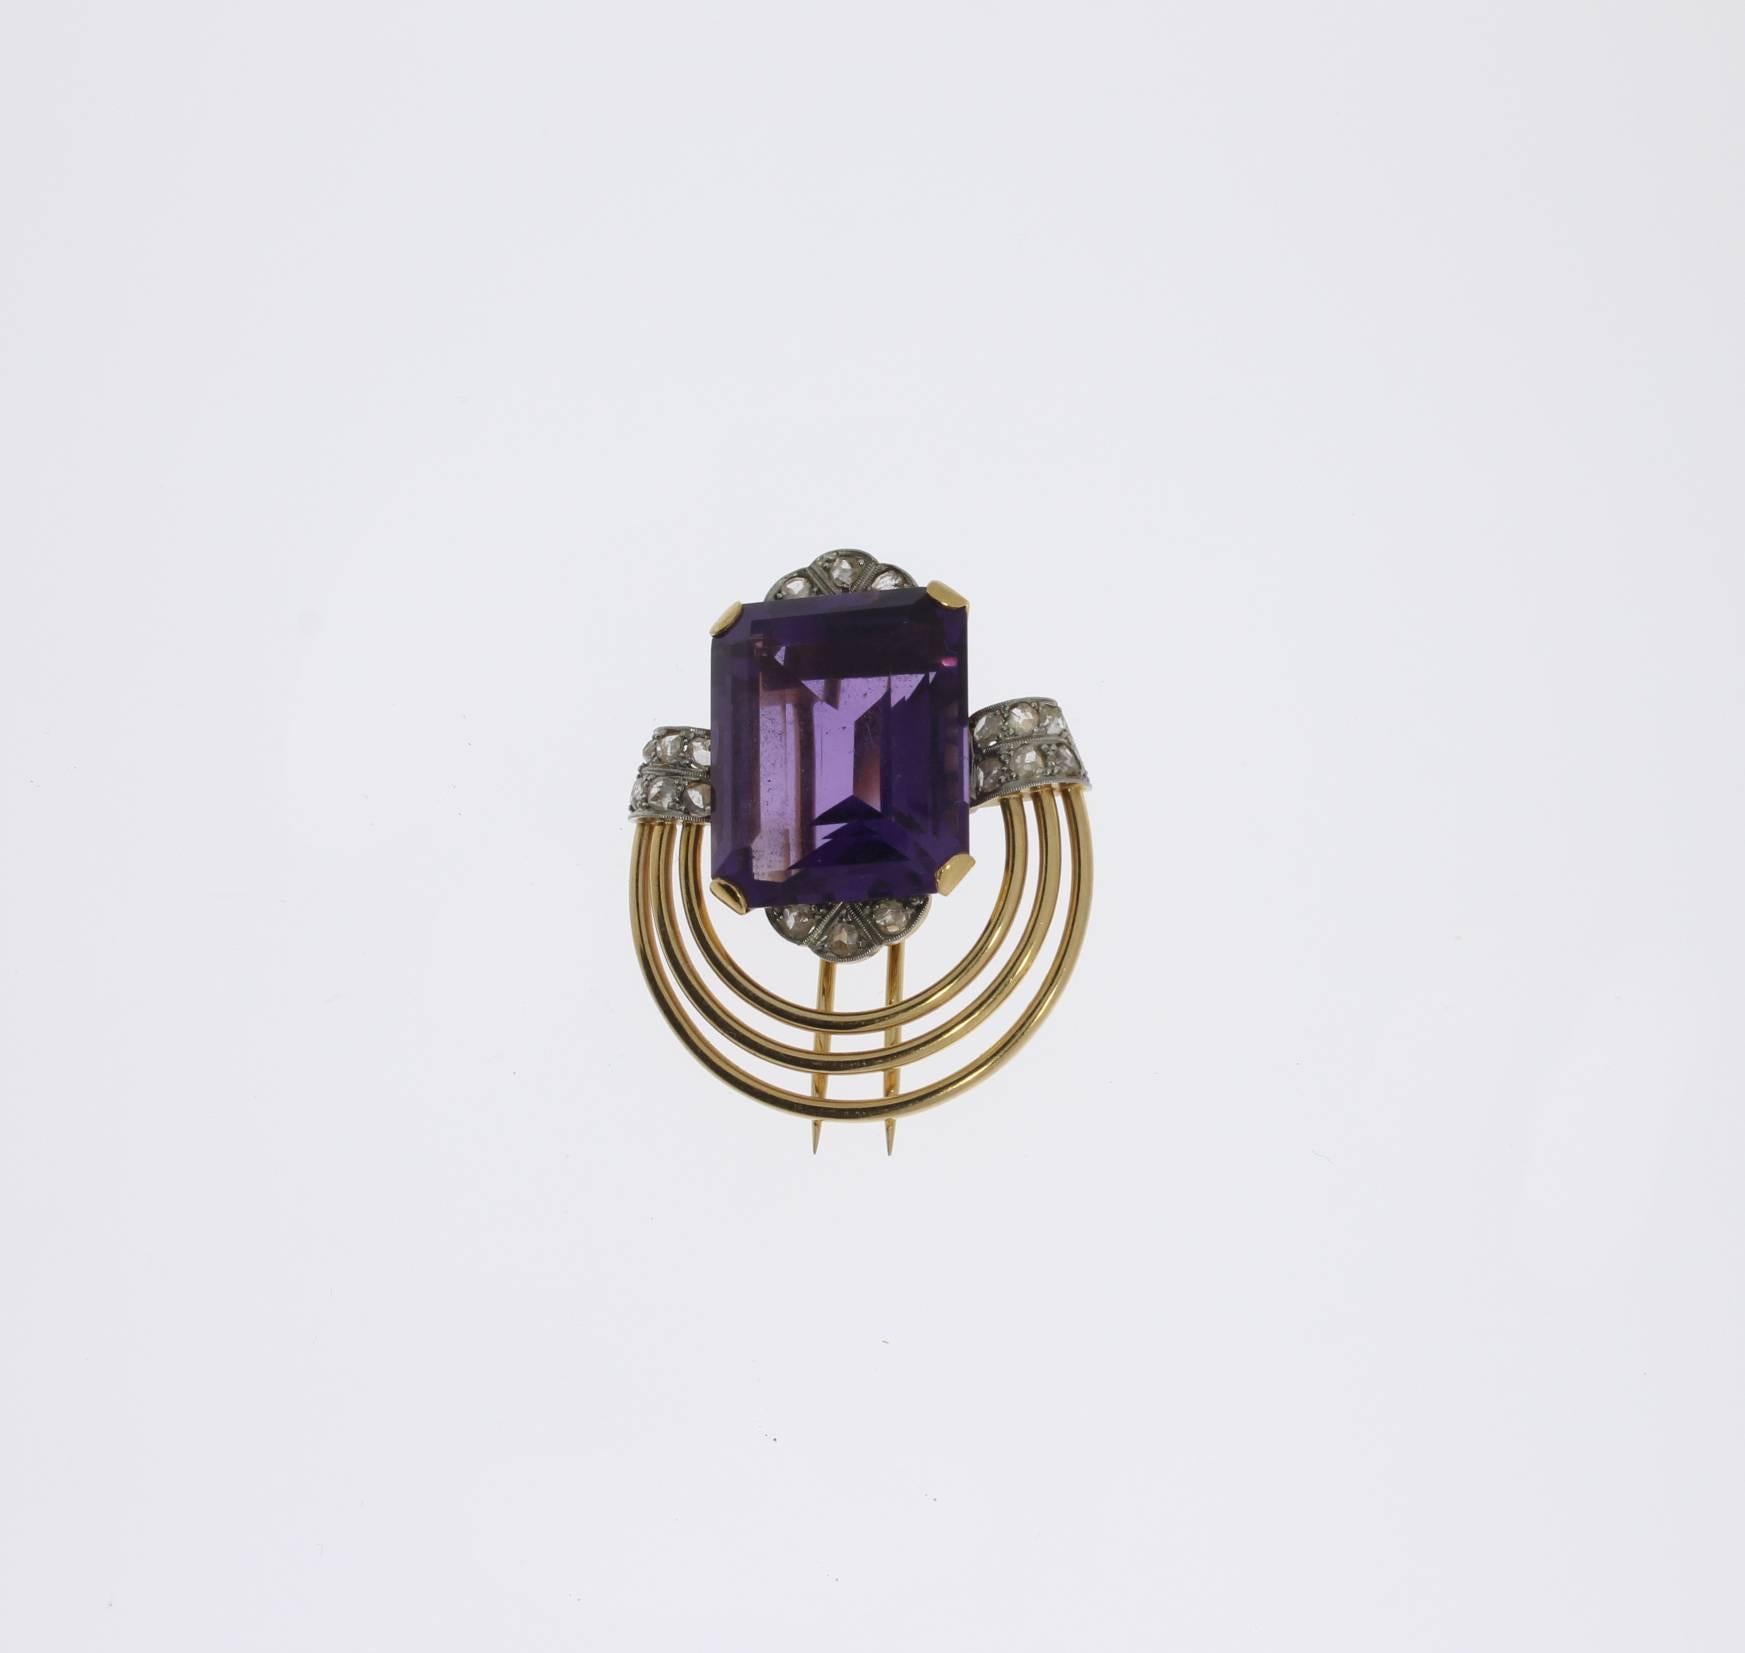 Europe, 1930's-1940's. Central emerald-cut amethyst weighing approximately 23,66 ct. Accompanied by 18 rose-cut diamonds with a total weight of 0,48 ct. Mounted in 18 K red gold and platinum. Total weight: 15,8 g.
Dimensions: 1.34 x 1.26 in ( 3,4 x